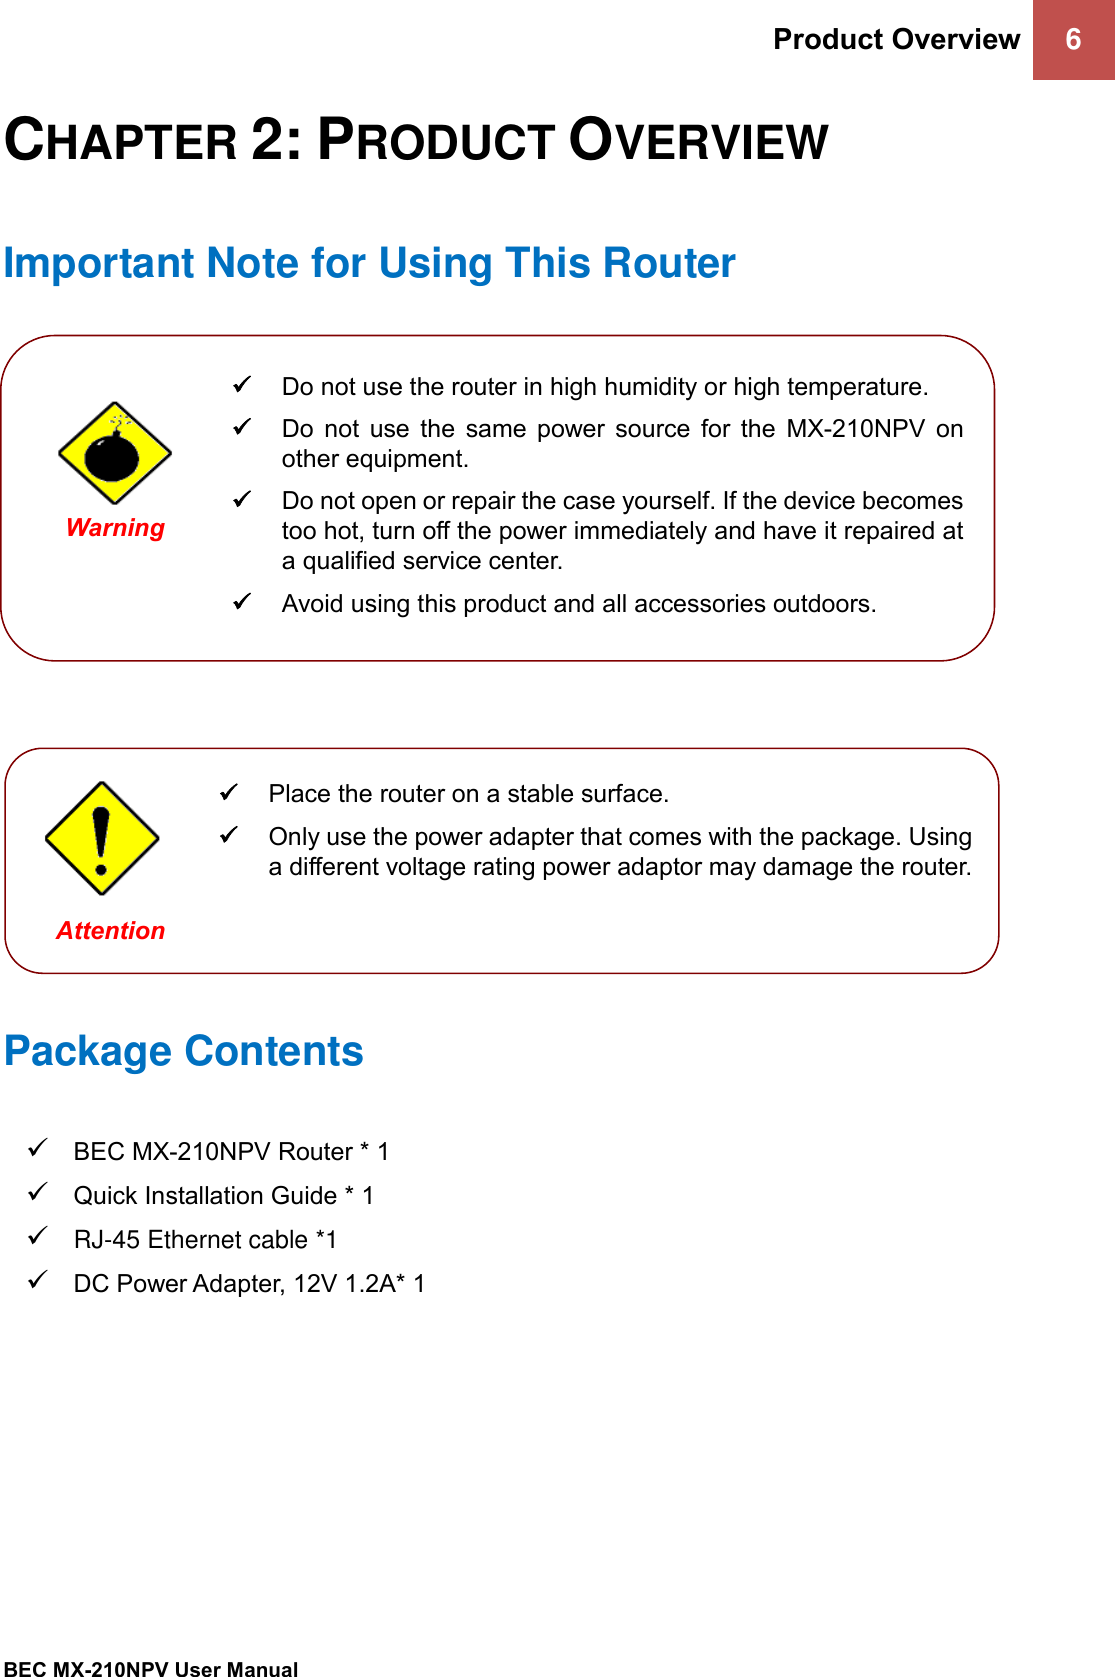 Product Overview 6   BEC MX-210NPV User Manual  CHAPTER 2: PRODUCT OVERVIEW Important Note for Using This Router                 Package Contents ✓ BEC MX-210NPV Router * 1 ✓ Quick Installation Guide * 1 ✓ RJ-45 Ethernet cable *1 ✓ DC Power Adapter, 12V 1.2A* 1    ✓ Do not use the router in high humidity or high temperature. ✓ Do  not  use  the  same  power  source  for  the  MX-210NPV  on other equipment. ✓ Do not open or repair the case yourself. If the device becomes too hot, turn off the power immediately and have it repaired at a qualified service center.  ✓ Avoid using this product and all accessories outdoors.   Warning  ✓ Place the router on a stable surface. ✓ Only use the power adapter that comes with the package. Using a different voltage rating power adaptor may damage the router.  Attention 